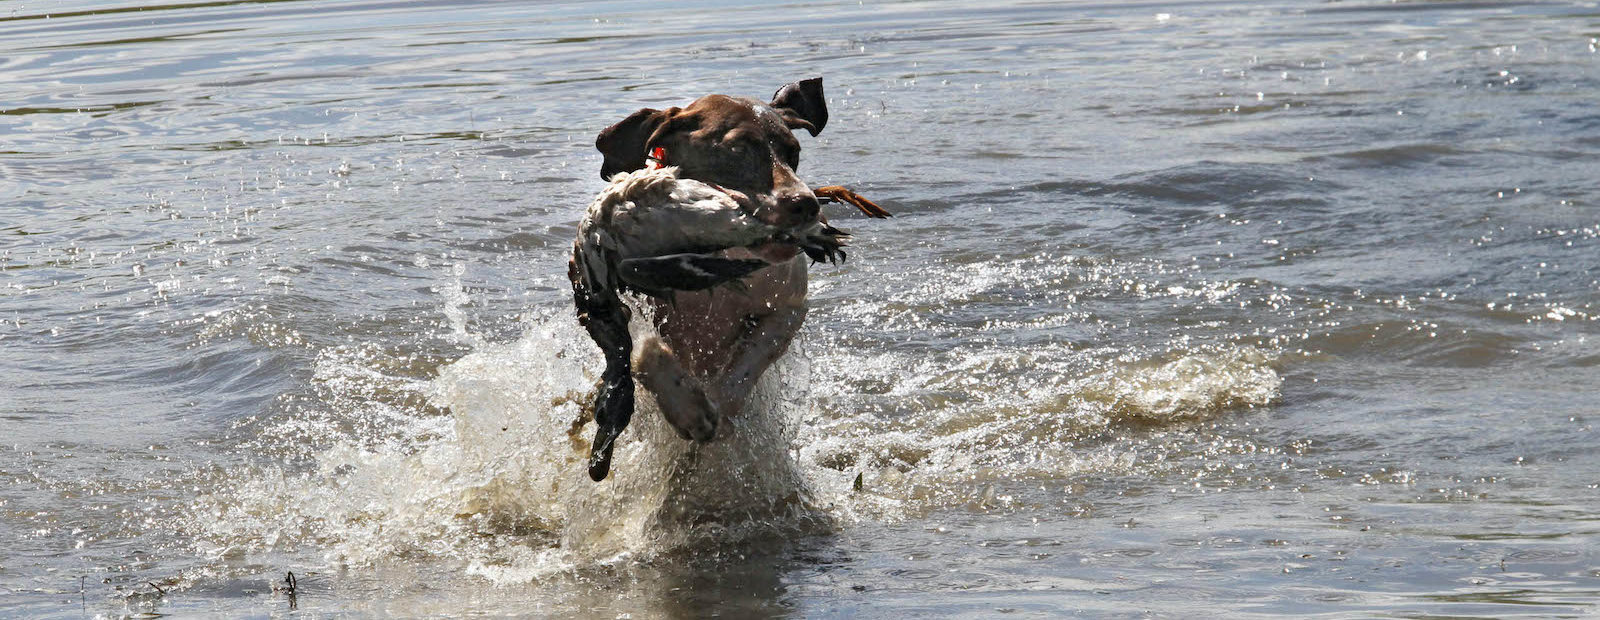 A German Shorthaired Pointer retrieves a duck from the water